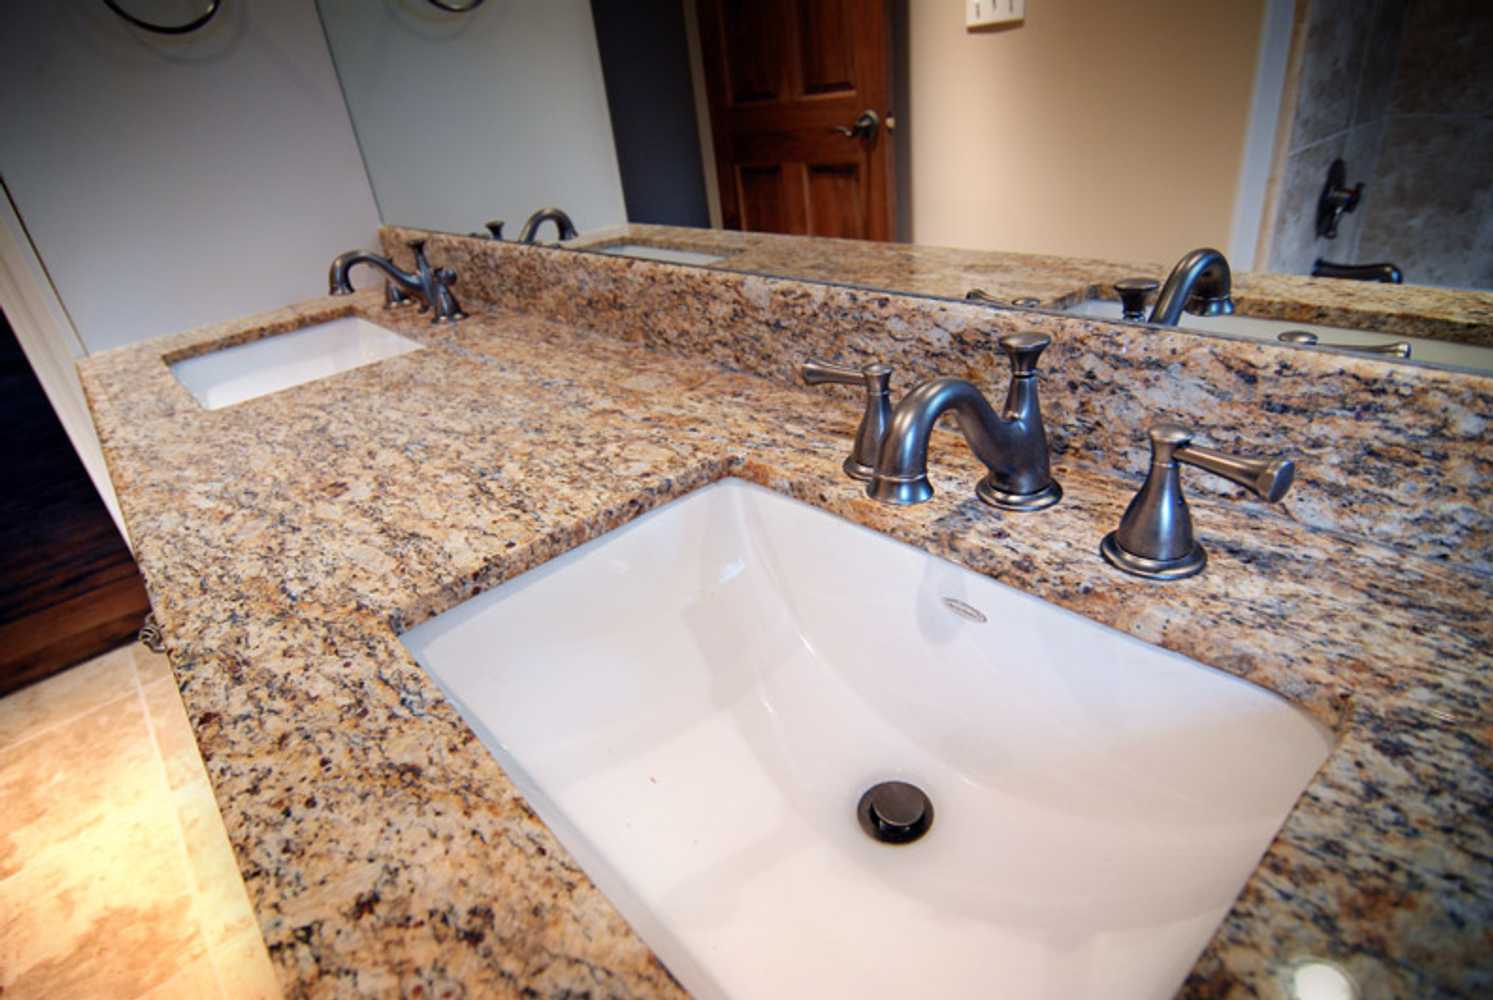 Countertop Project Photos by OTM Designs & Remodeling Inc.